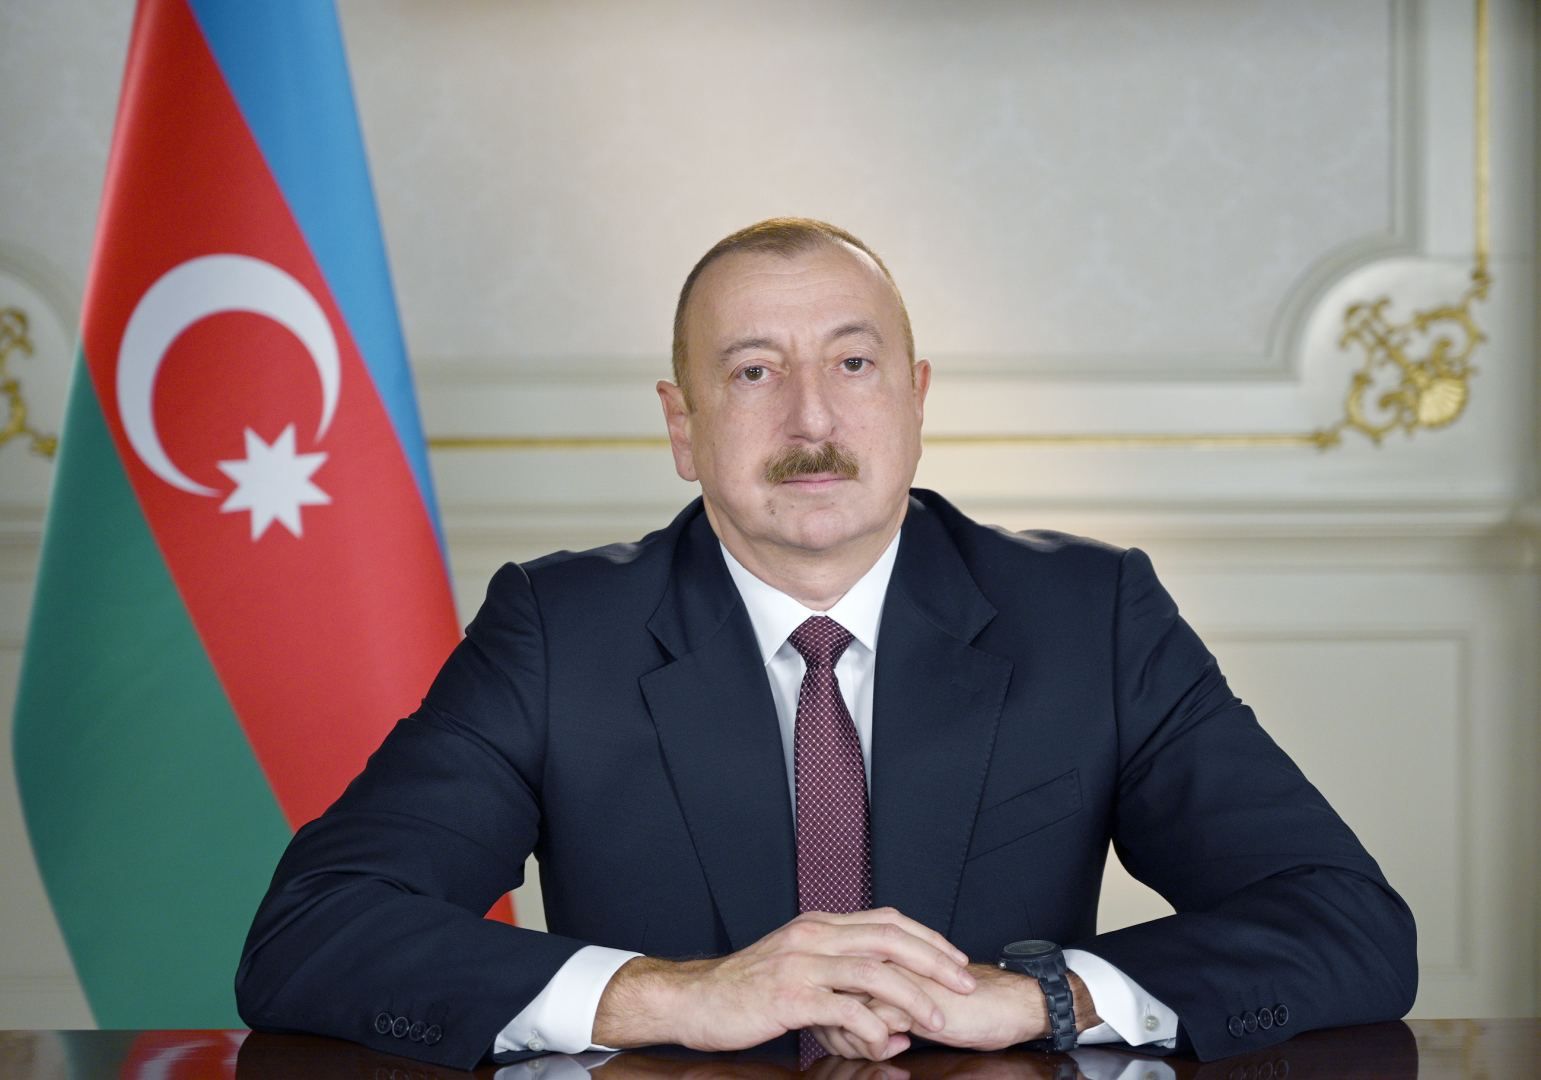 President Ilham Aliyev orders conscription for active military service [UPDATE]